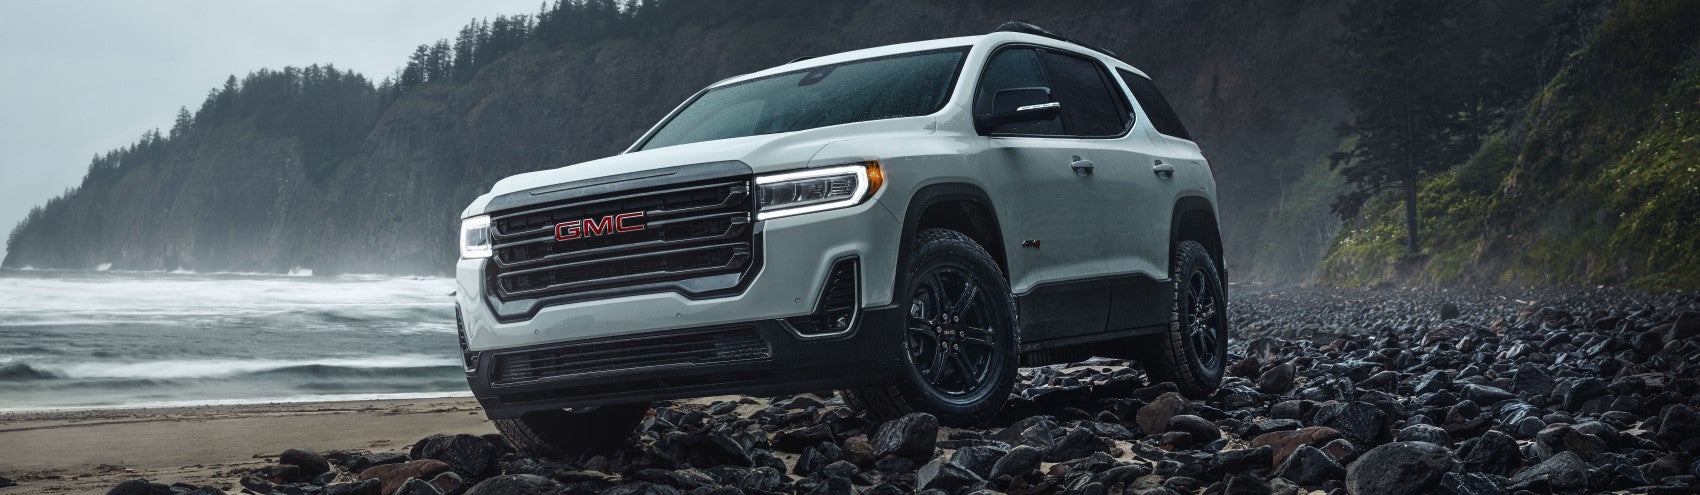 GMC AcadiaLease deals Fishers IN